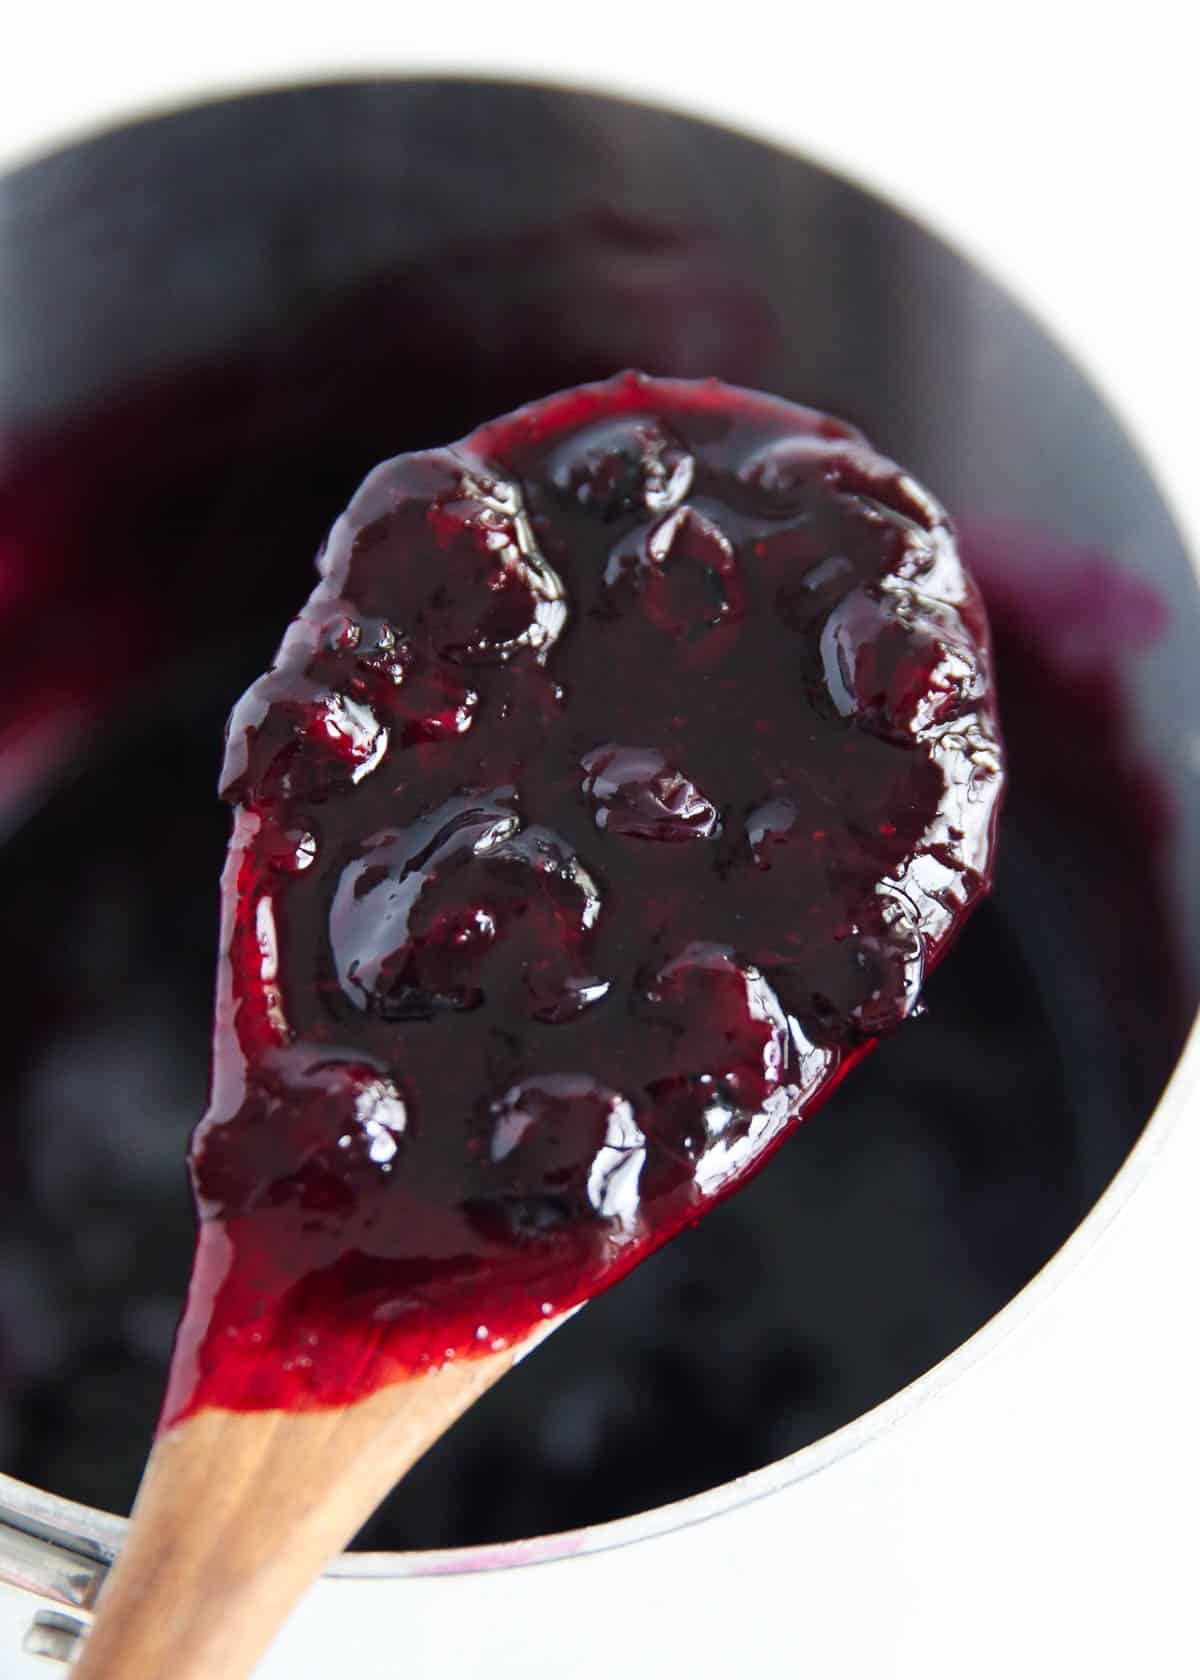 A wooden spoonful of blueberry sauce.